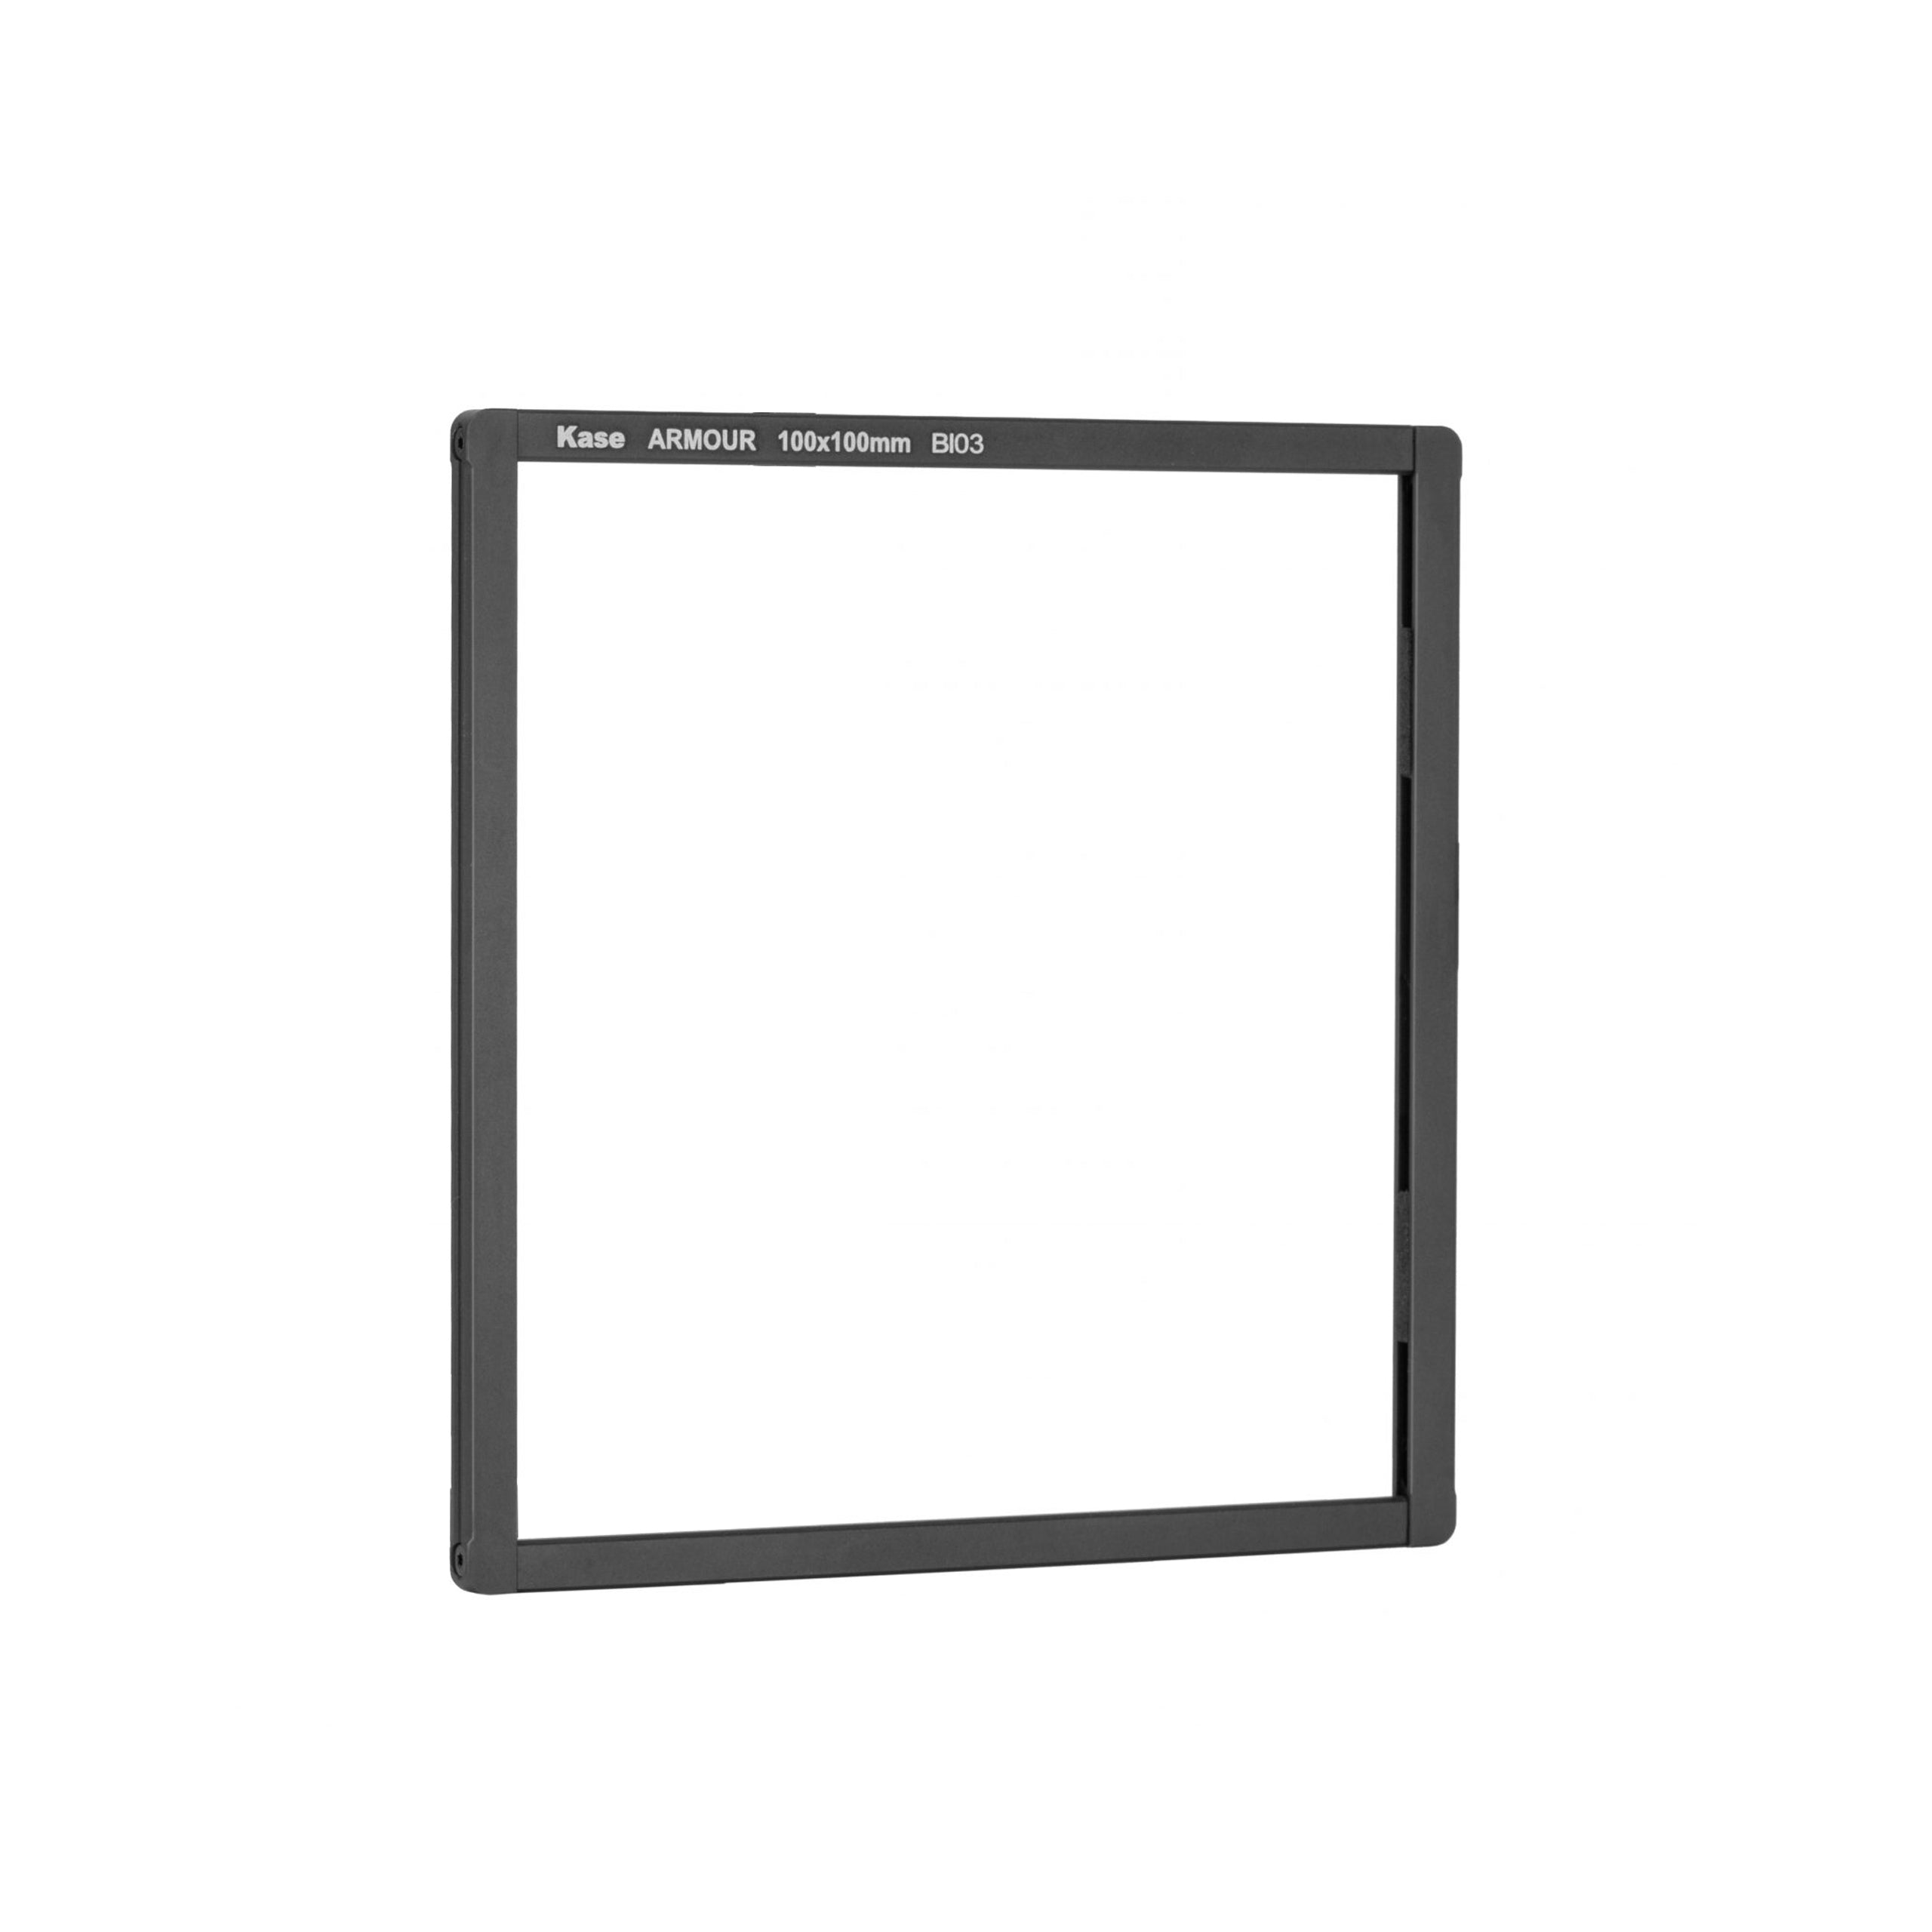 Product Image of Kase Armour Magnetic Square Frame for 100X100X2mm